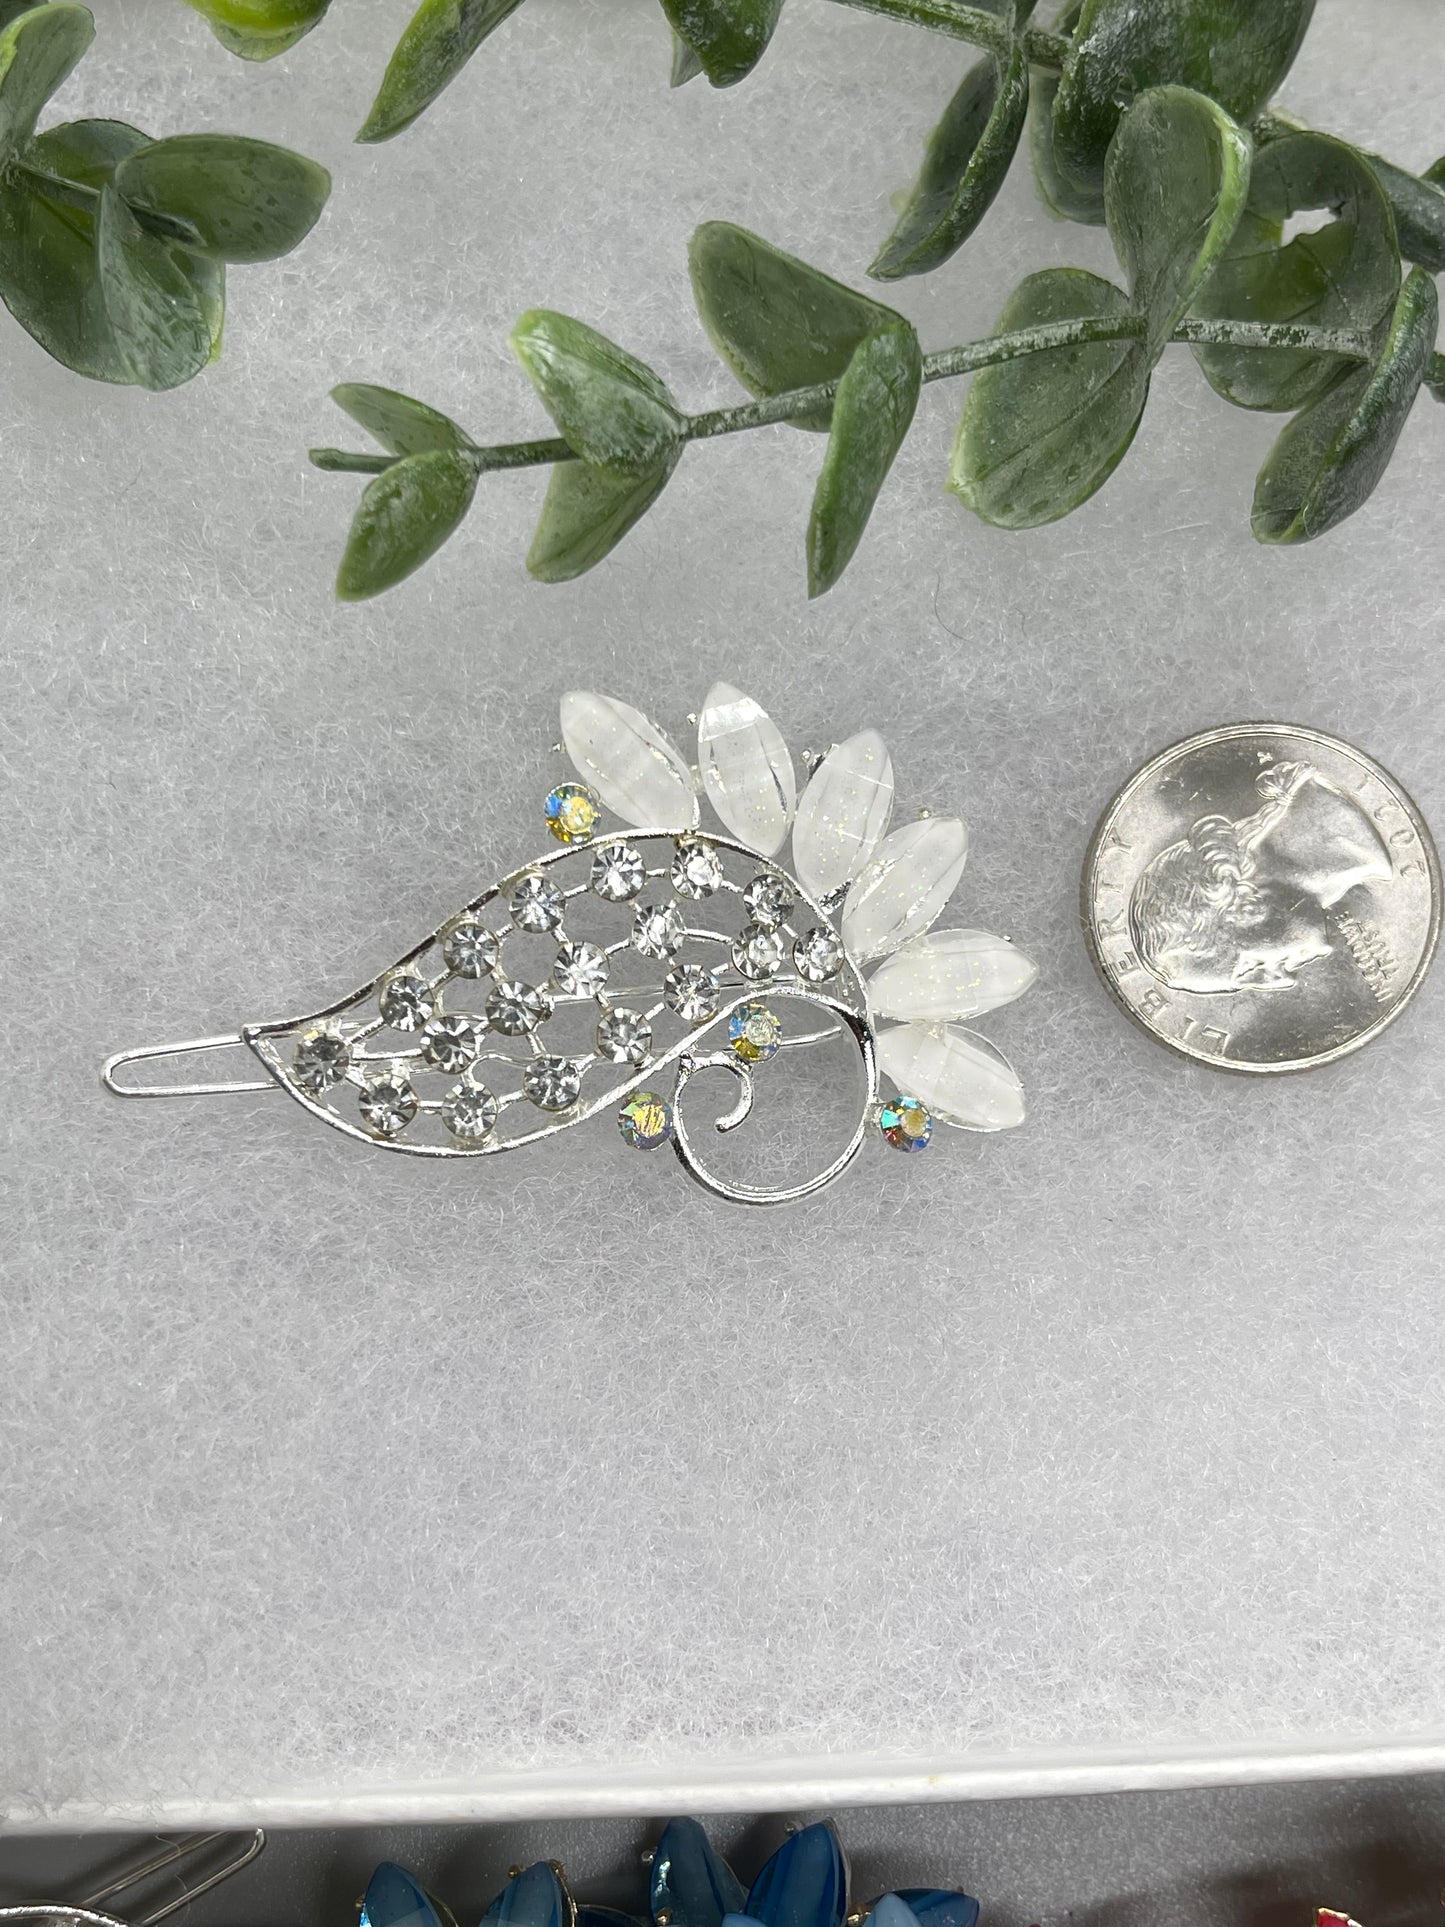 White Crystal Rhinestone peacock hair clip approximately 3.0”Metal silver tone formal hair accessory gift wedding bridal engagement